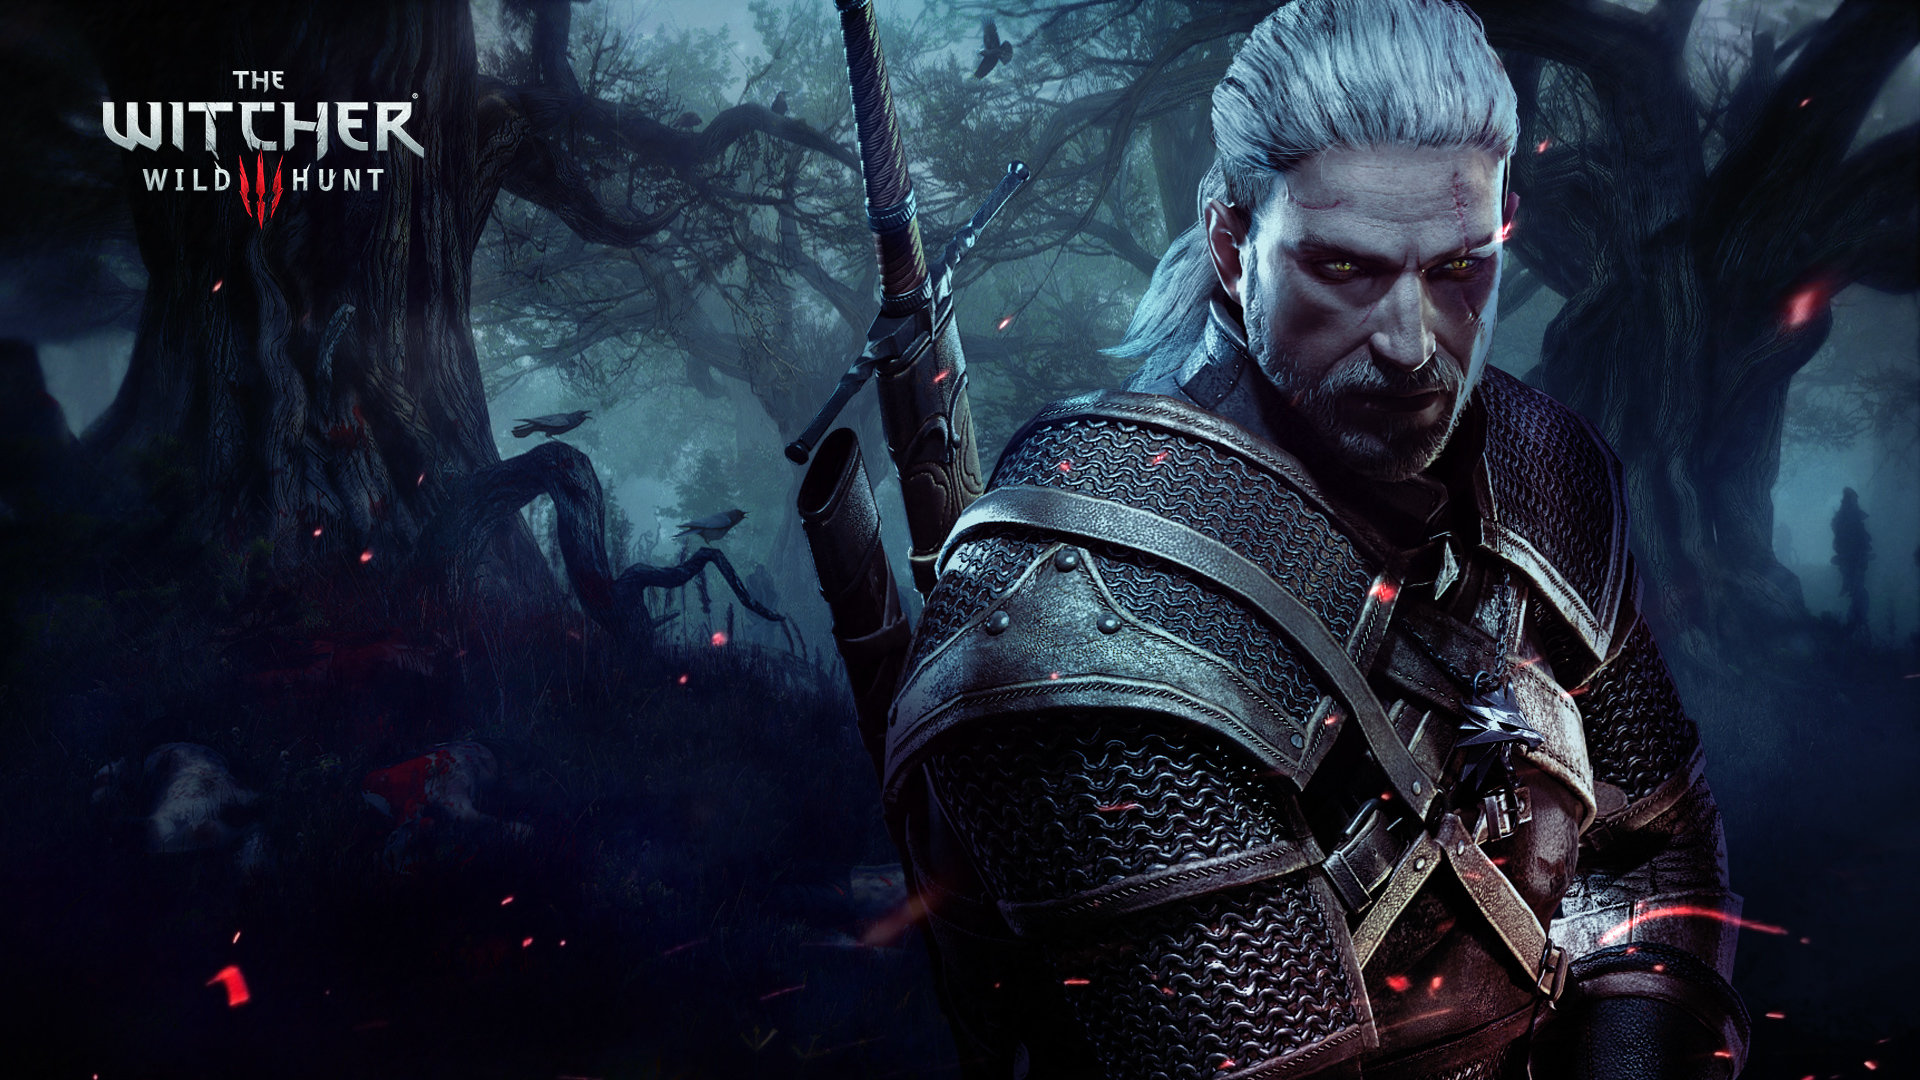 Download 1080p The Witcher 3: Wild Hunt PC wallpaper ID:17907 for free